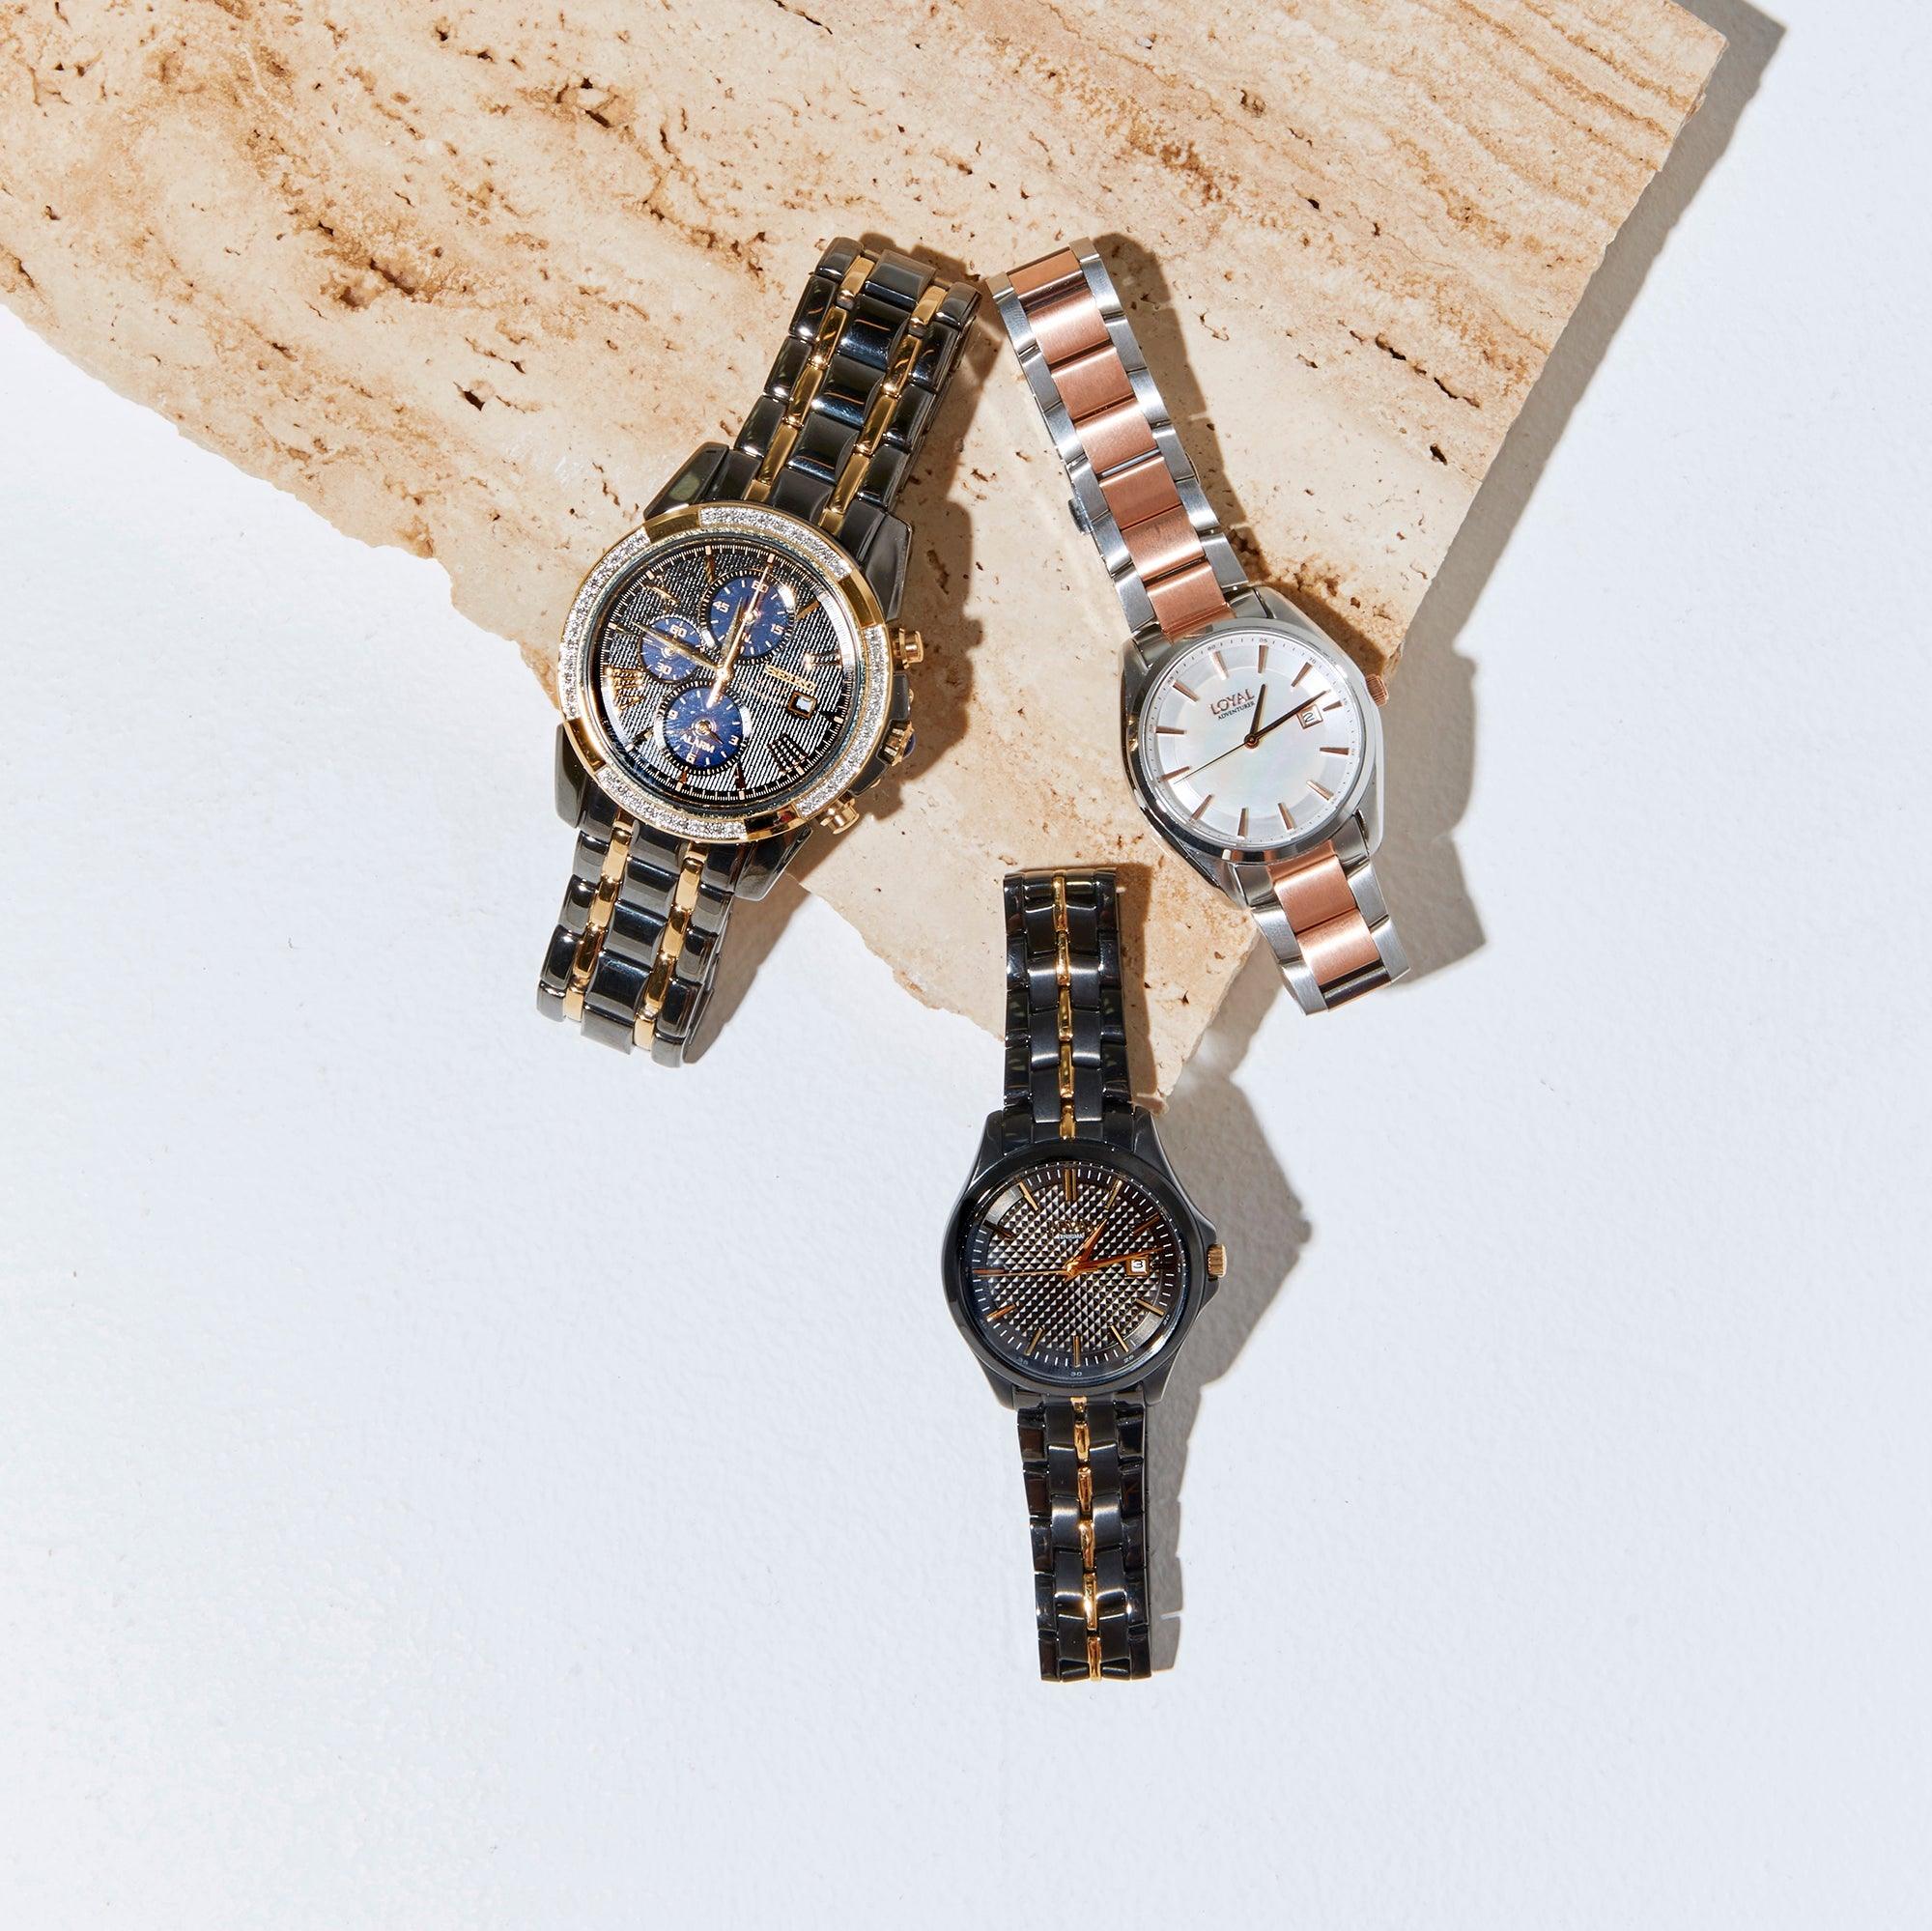 Loyal Watches : Our Top Picks! - Wallace Bishop